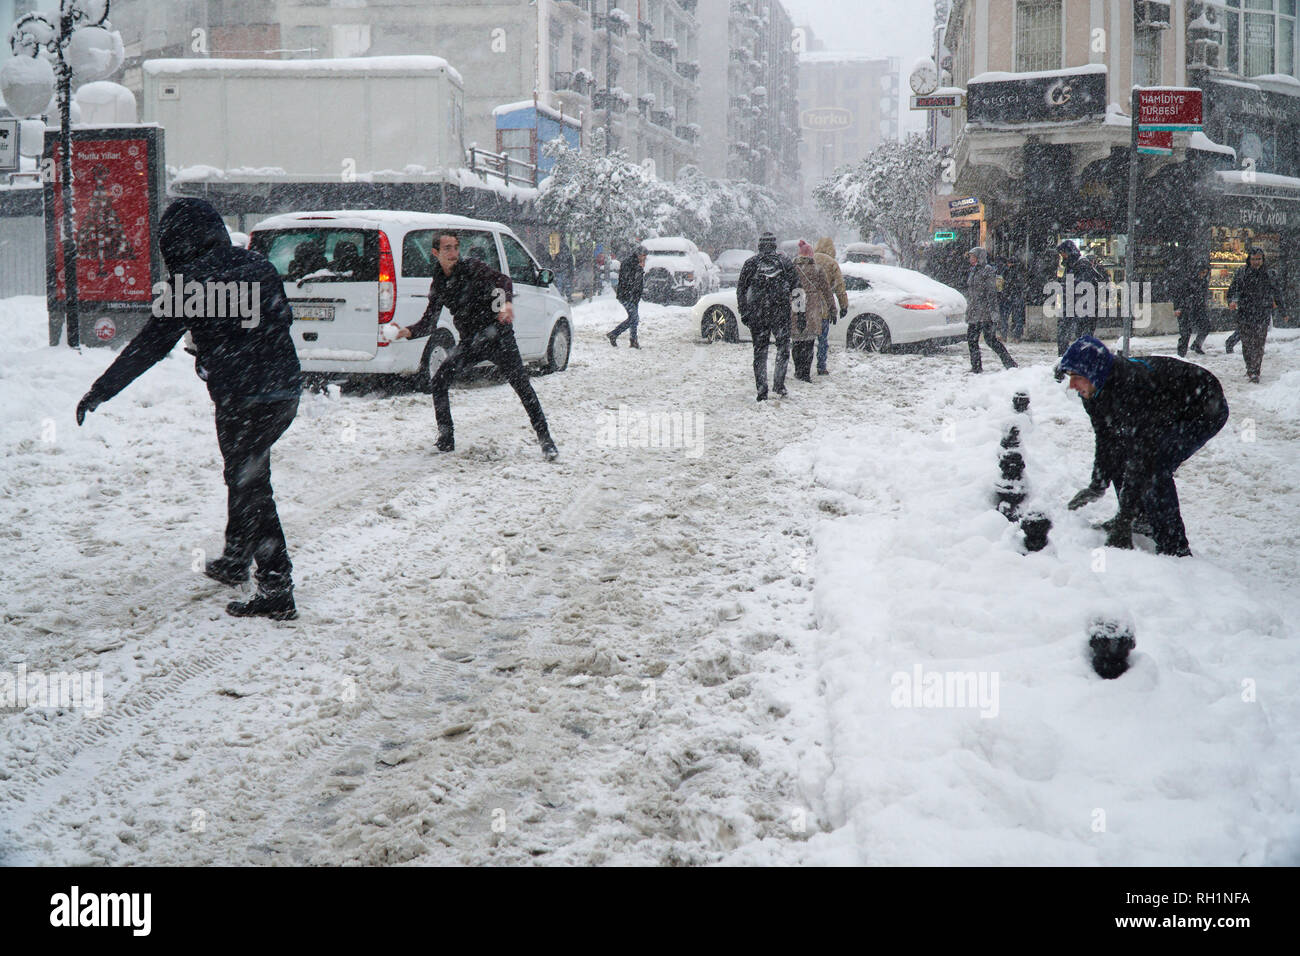 Istanbul, Eminonu, Turkey - January 9, 2017: Istanbul was covered with snow. This blizzard was the strongest of the last 30 years. Stock Photo